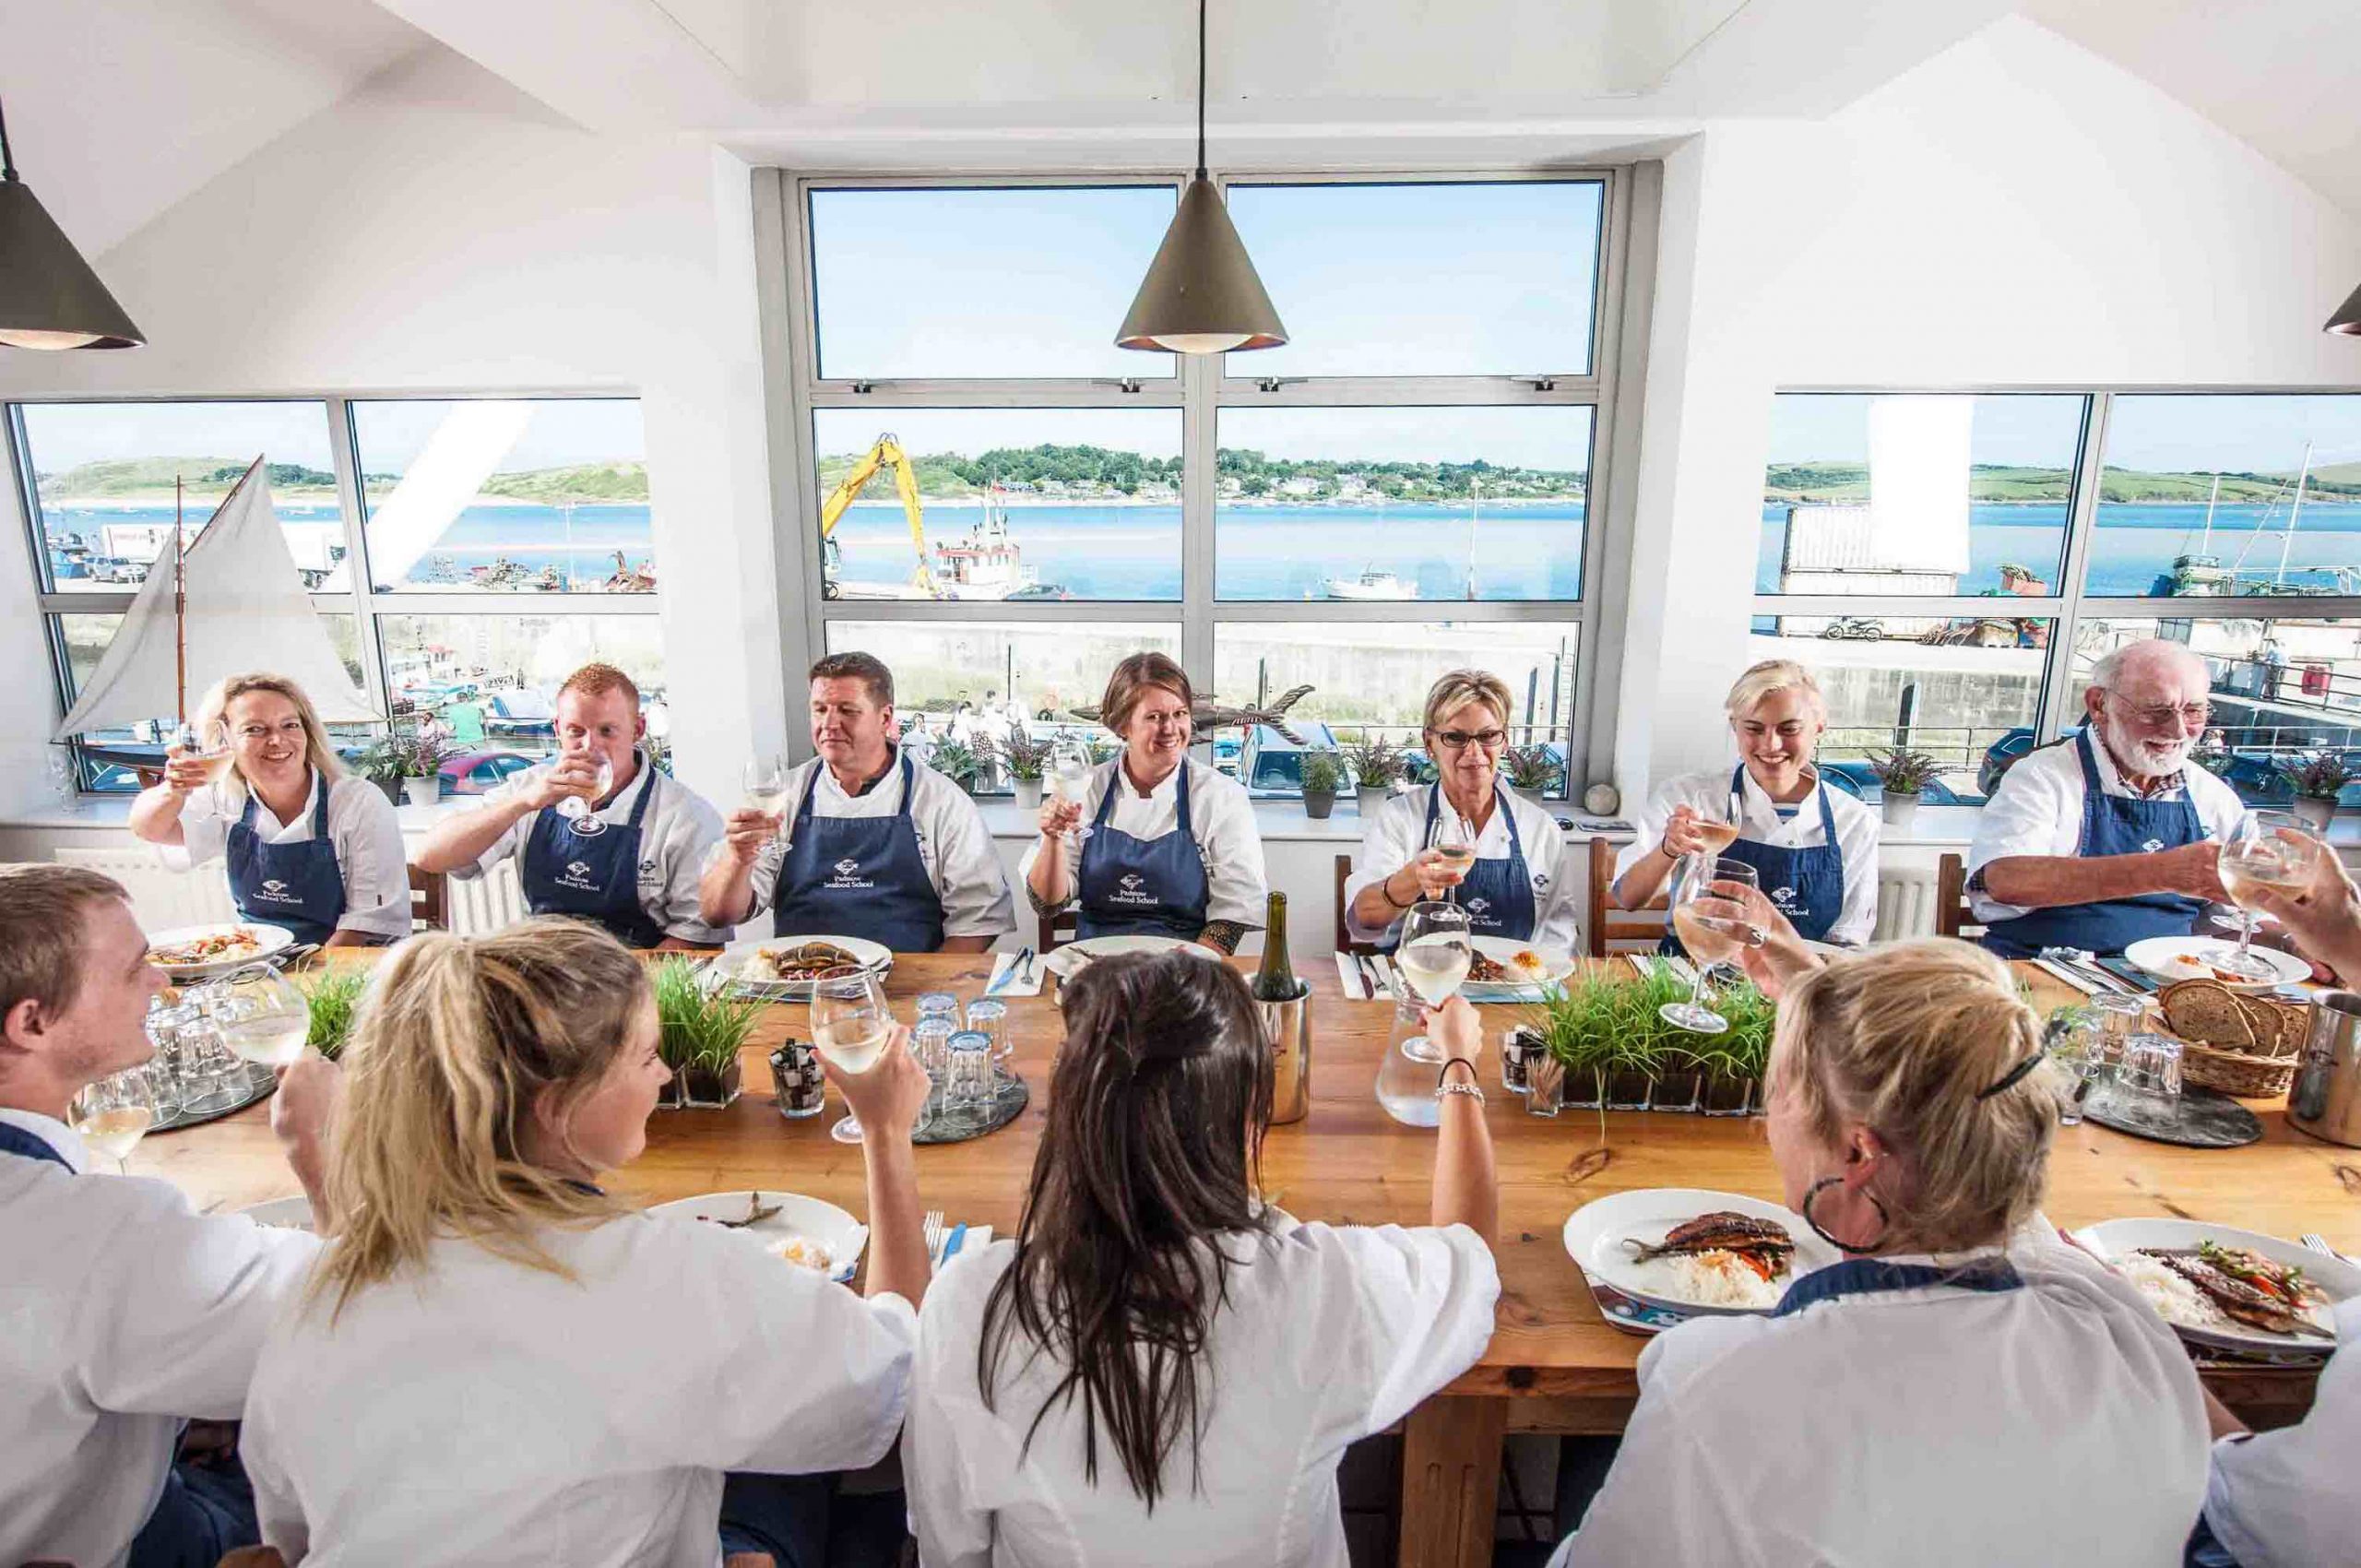 NEW: Rick Stein’s Cookery School launches on NCSG